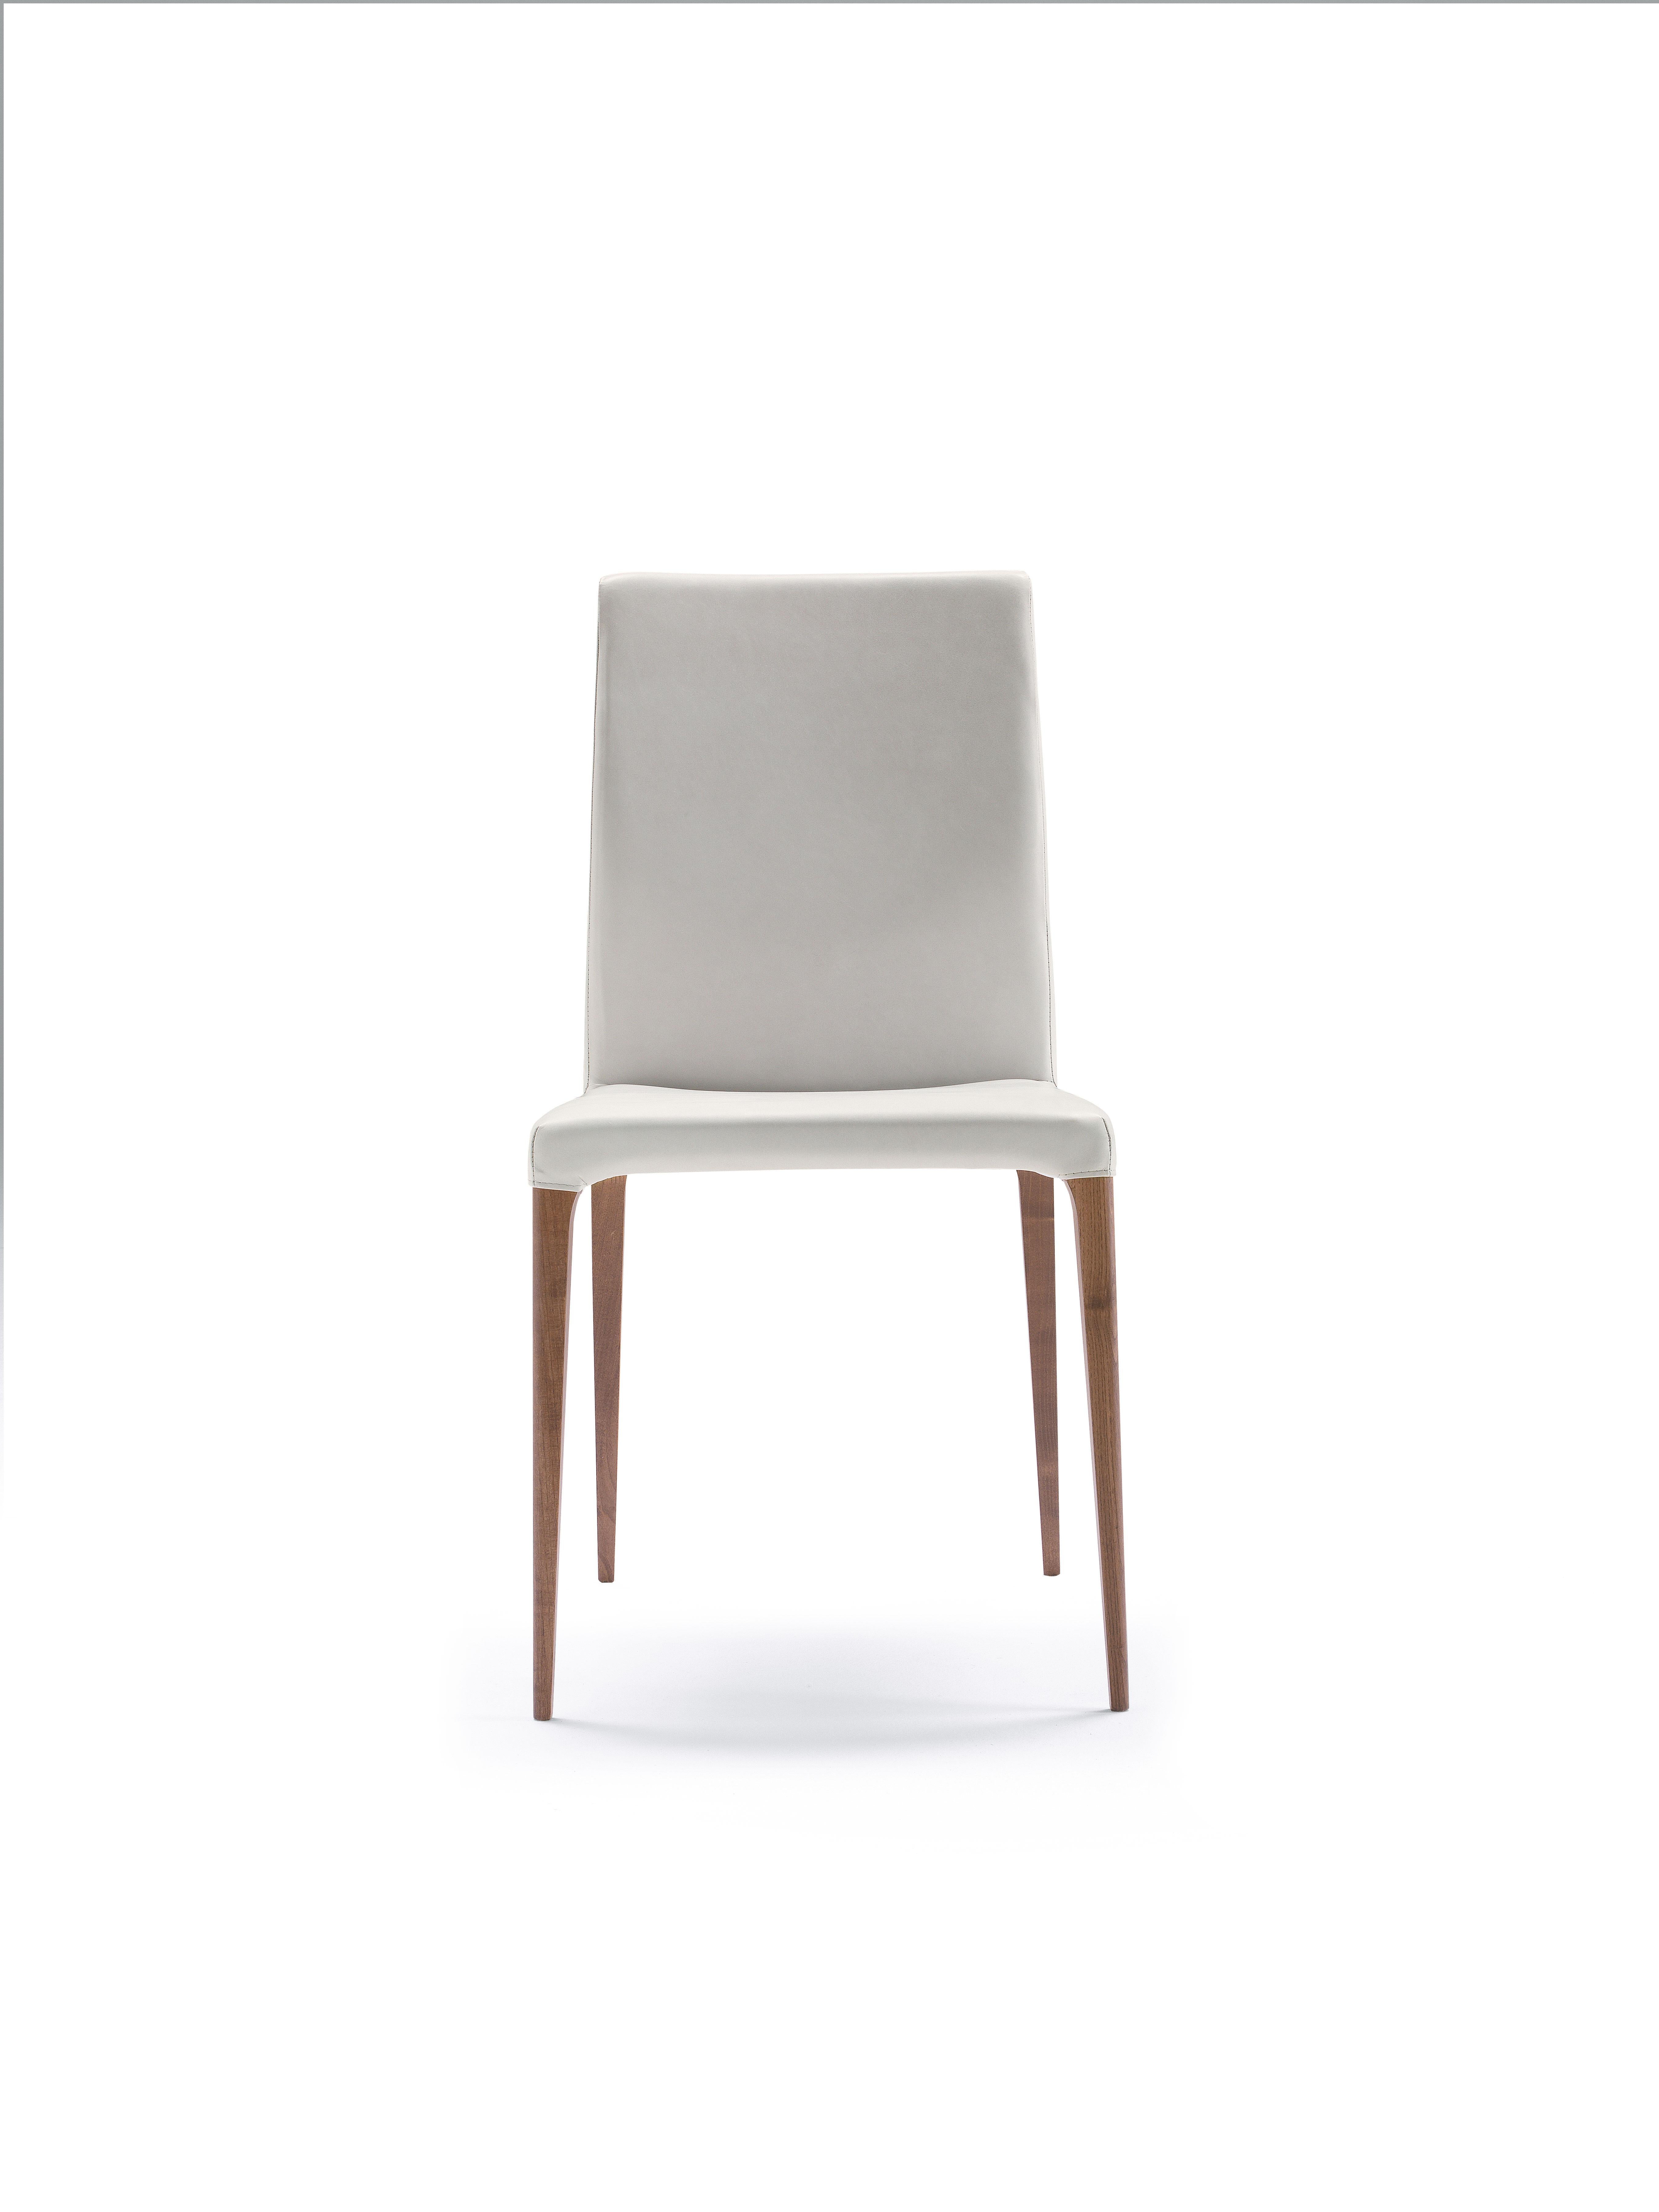 Chair with structure in solid ash. Seat and backrest covered in leather, eco-leather or fabric of our collection. Fixed or removable fabric. Available finishings: FN natural ash, CL American cherry, WG wengé, NC walnut, TB tobacco, open pore matte